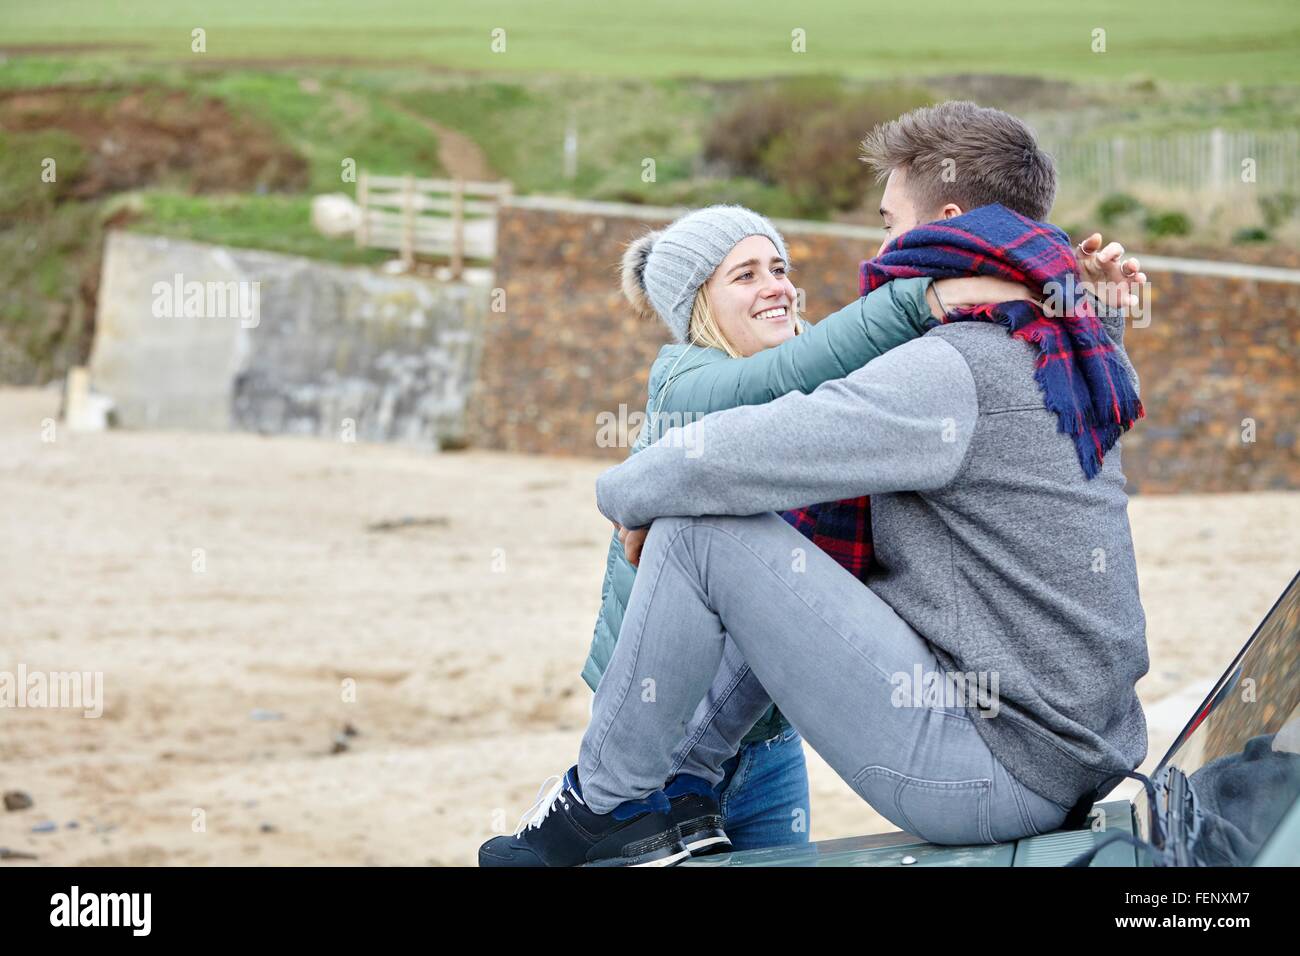 Romantic young couple sitting on car hood at beach Stock Photo